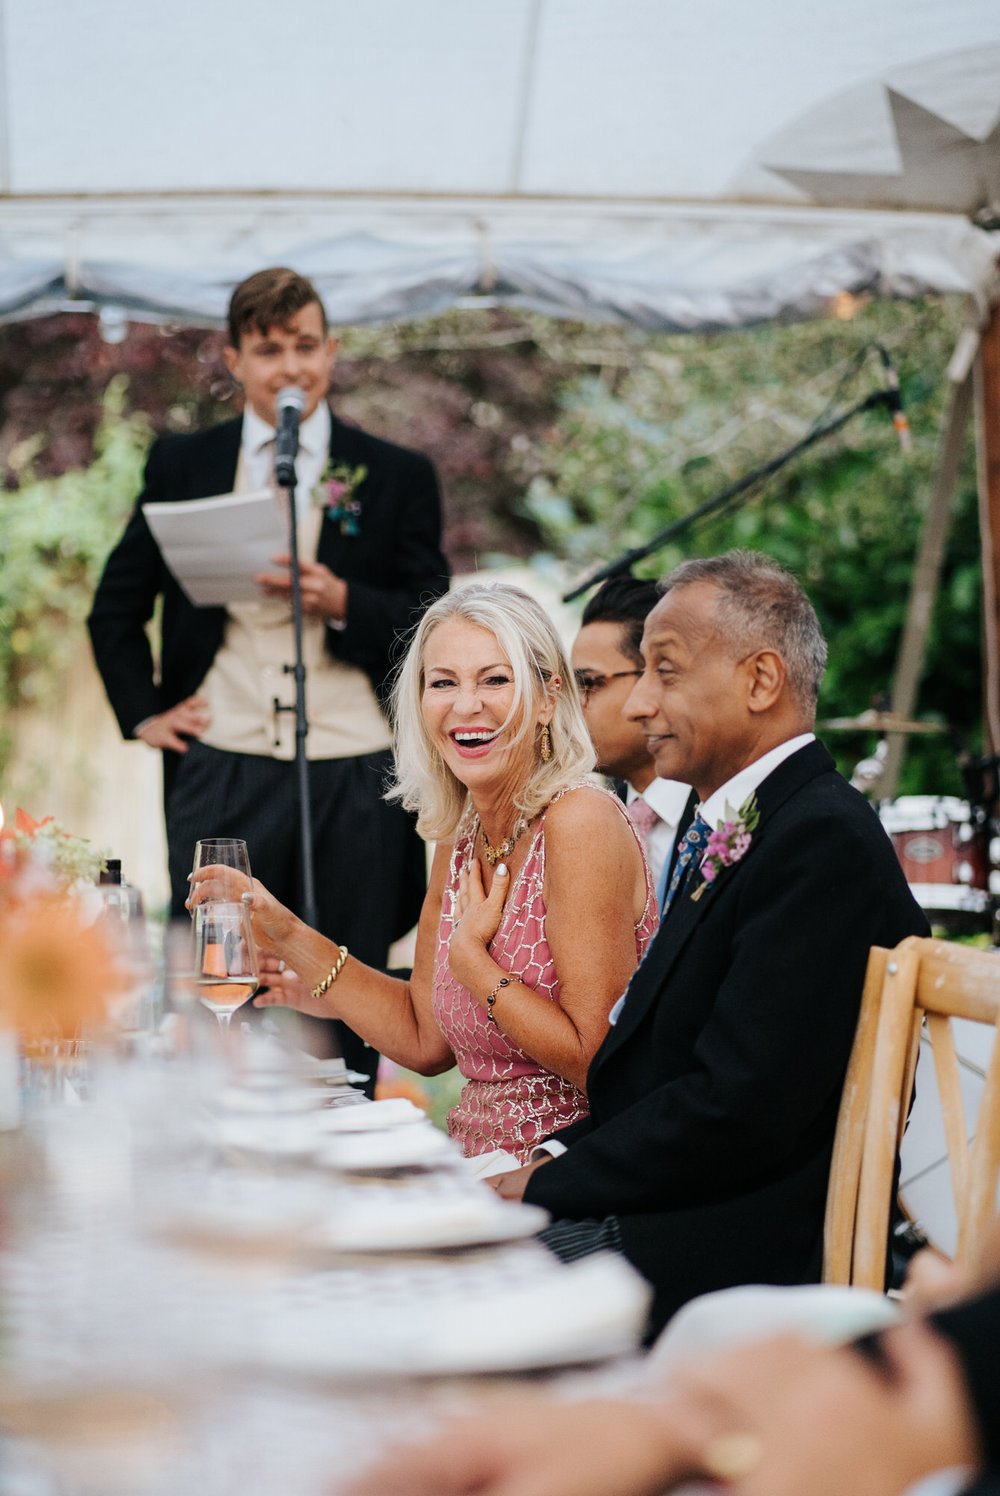 Groom's mother laughs as her son delivers his wedding speech inside marquee